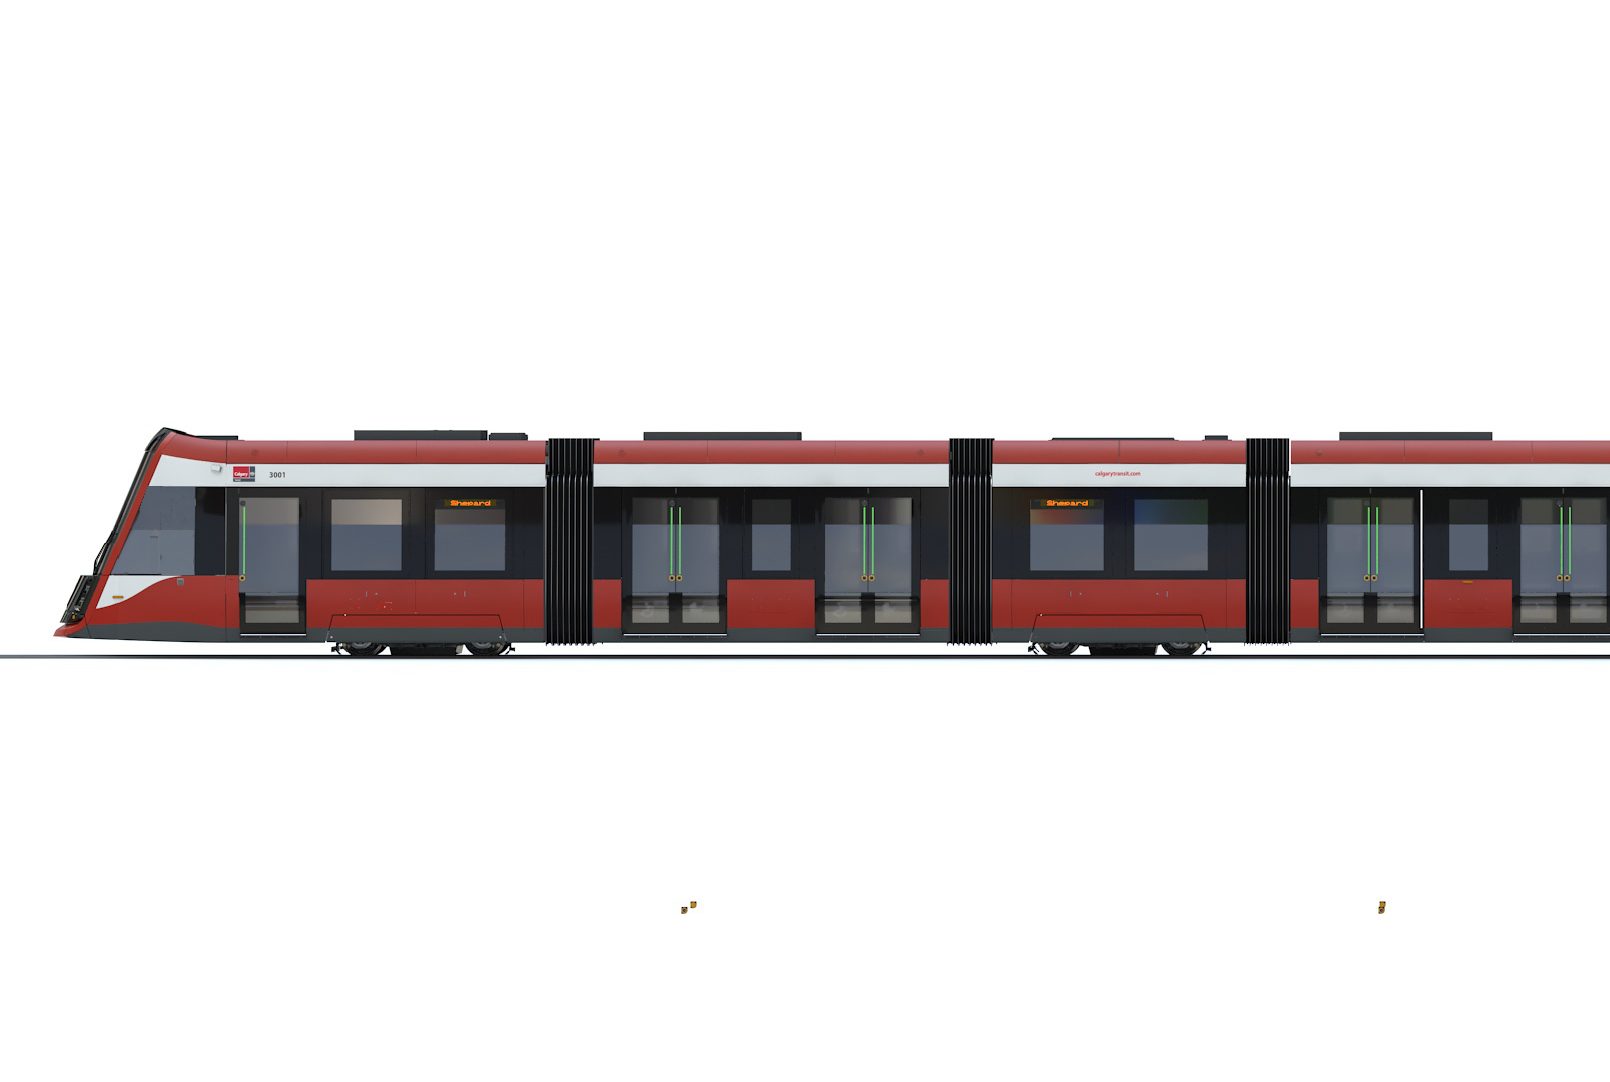 Long side view of the 2-car train for Green Line.